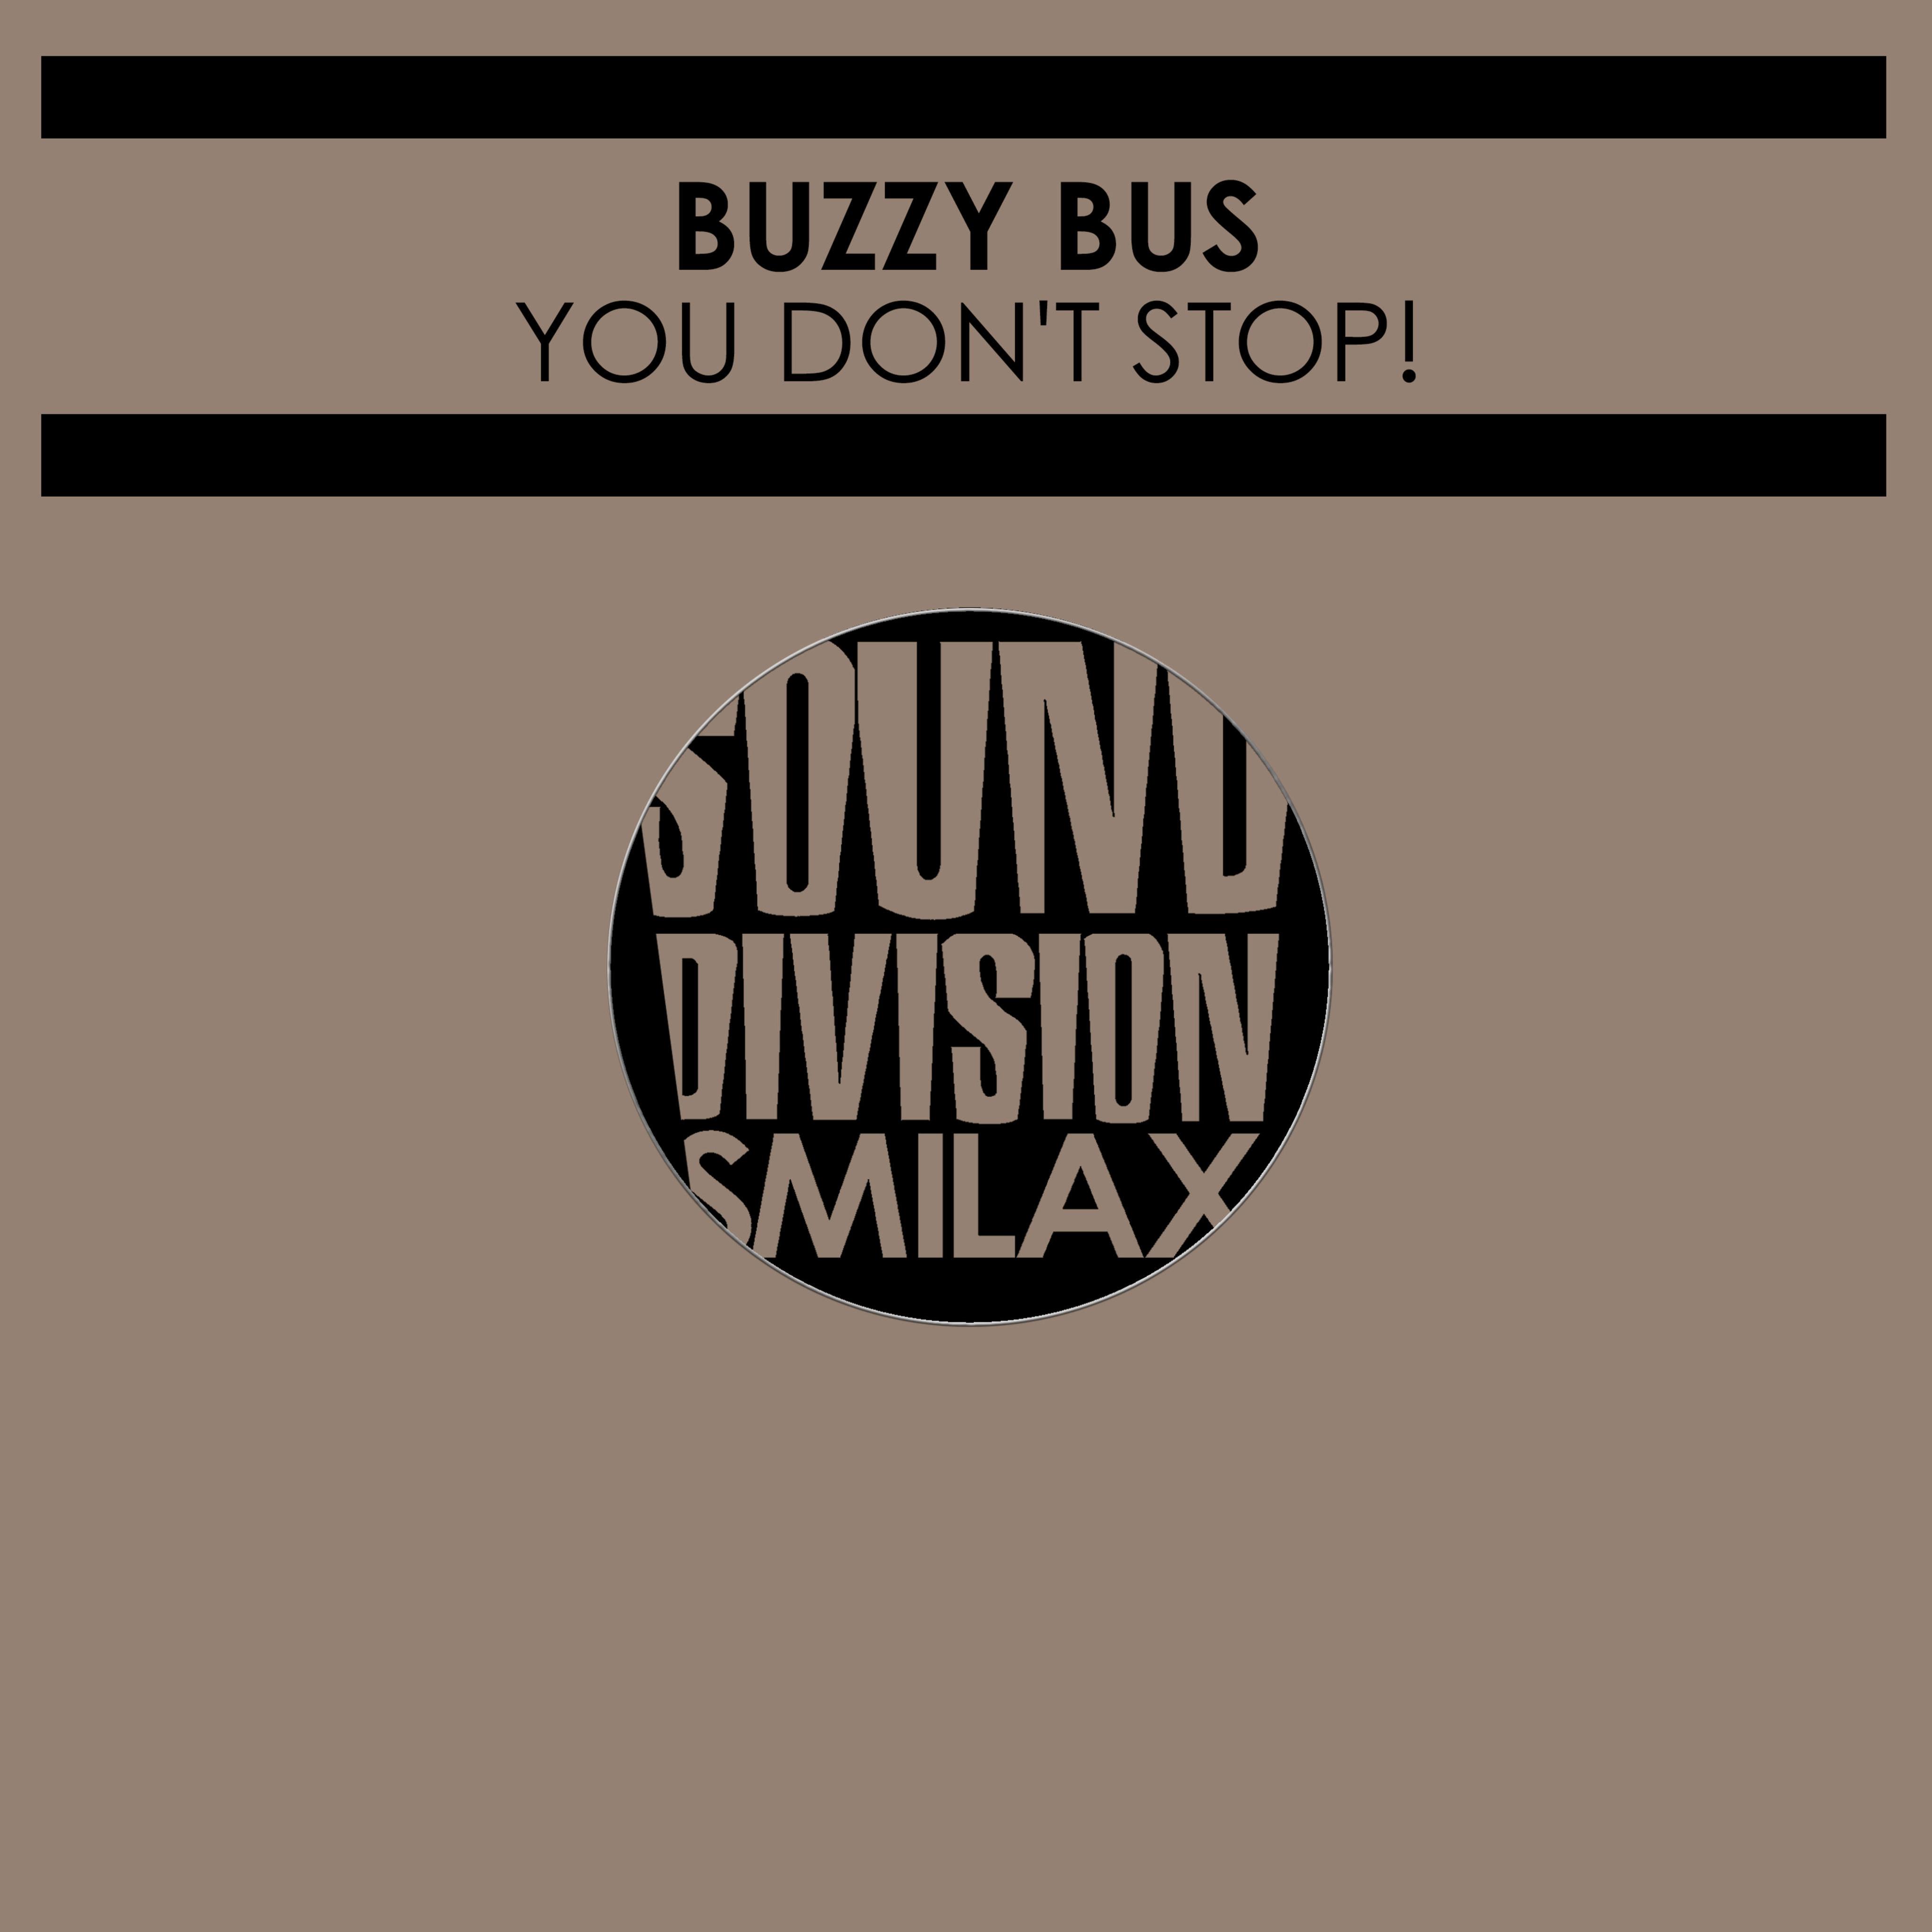 Buzzy Bus - You Don't Stop (Only 4 Housefloors)